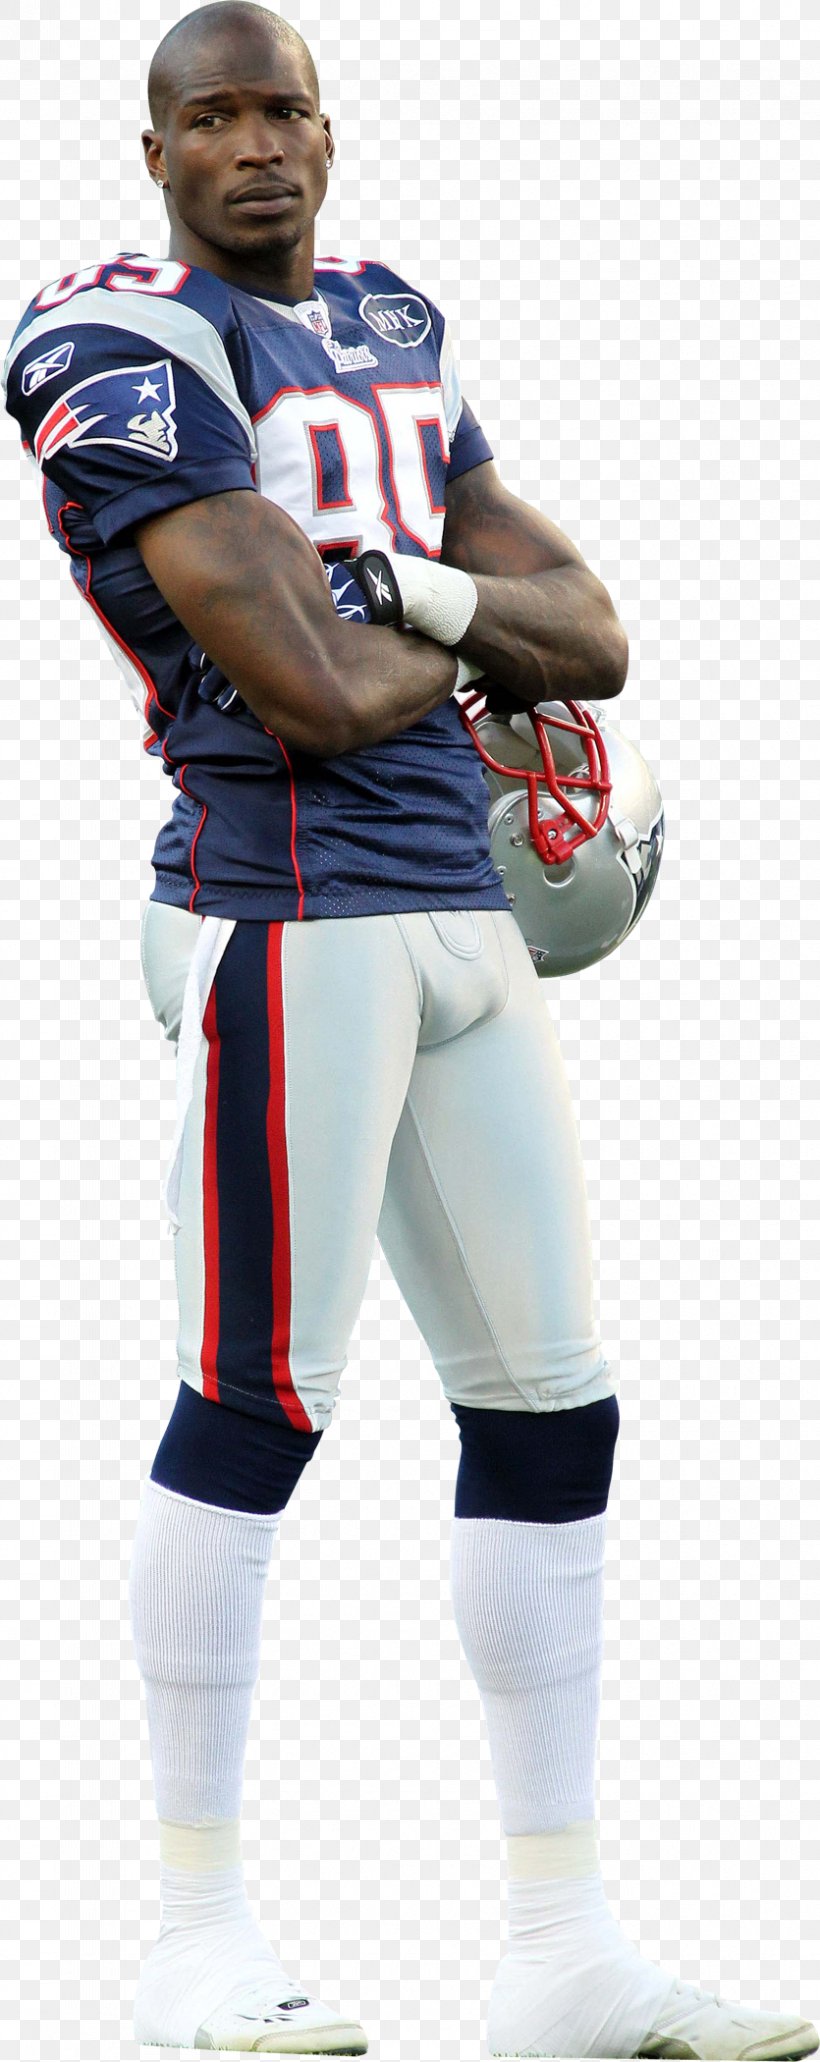 New England Patriots NFL Team Sport American Football Protective Gear, PNG, 835x2100px, New England Patriots, American Football, American Football Protective Gear, Baseball, Baseball Equipment Download Free